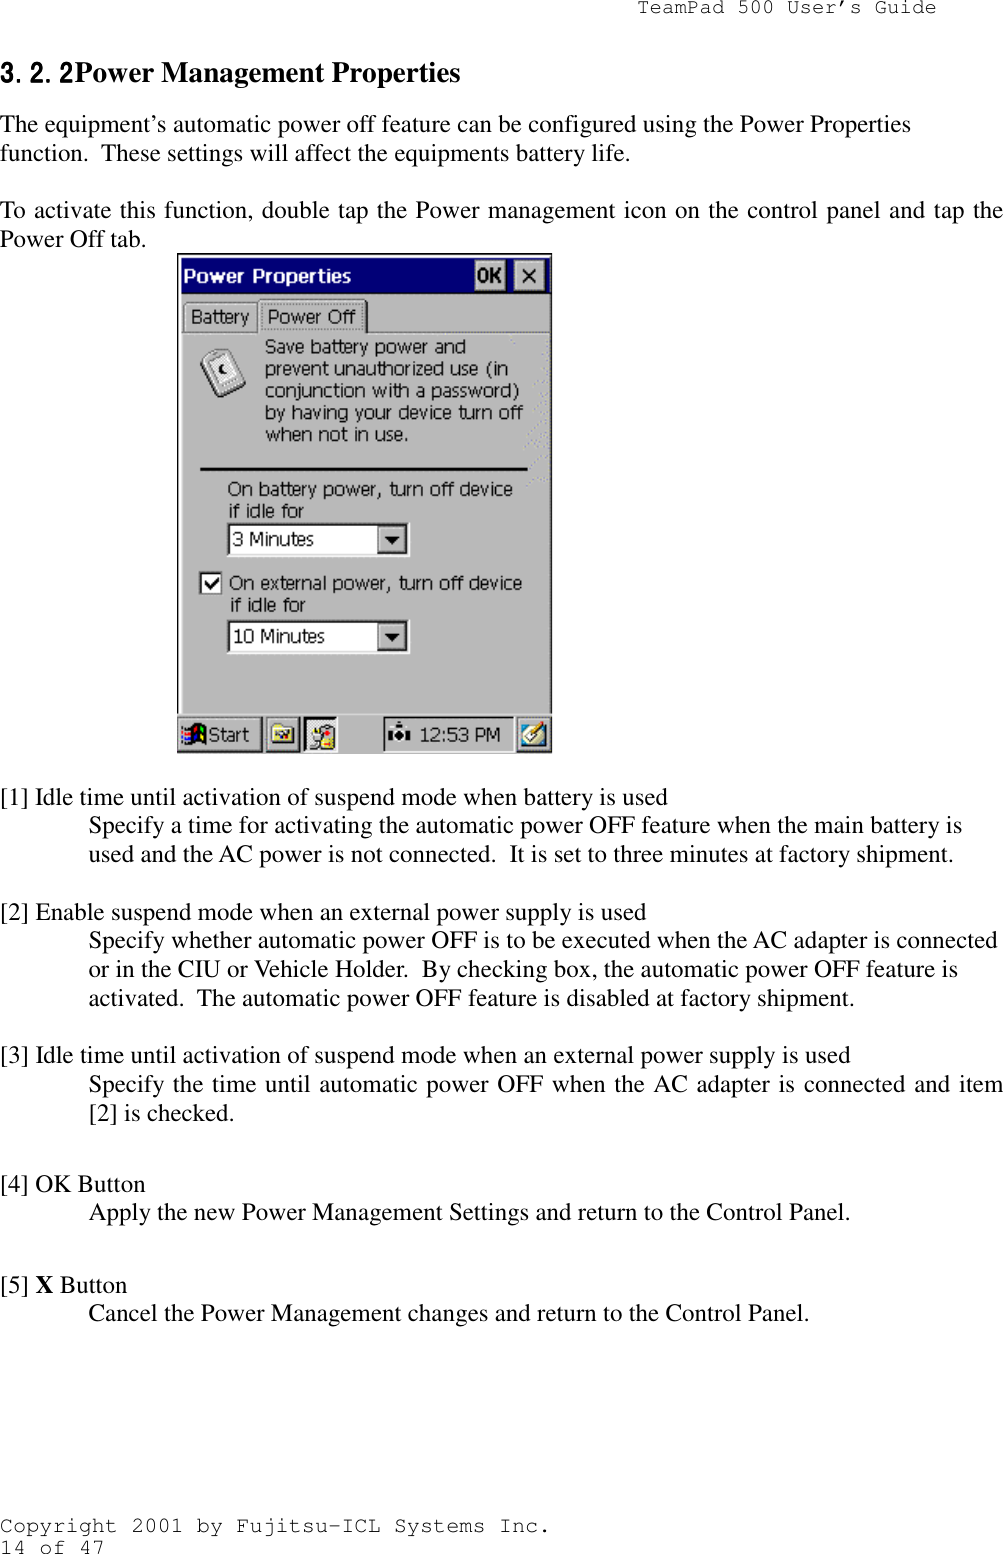                TeamPad 500 User’s GuideCopyright 2001 by Fujitsu-ICL Systems Inc.14 of 473.2.23.2.23.2.23.2.2 Power Management PropertiesThe equipment’s automatic power off feature can be configured using the Power Propertiesfunction.  These settings will affect the equipments battery life.To activate this function, double tap the Power management icon on the control panel and tap thePower Off tab.          [1] Idle time until activation of suspend mode when battery is usedSpecify a time for activating the automatic power OFF feature when the main battery isused and the AC power is not connected.  It is set to three minutes at factory shipment.[2] Enable suspend mode when an external power supply is usedSpecify whether automatic power OFF is to be executed when the AC adapter is connectedor in the CIU or Vehicle Holder.  By checking box, the automatic power OFF feature isactivated.  The automatic power OFF feature is disabled at factory shipment.[3] Idle time until activation of suspend mode when an external power supply is usedSpecify the time until automatic power OFF when the AC adapter is connected and item[2] is checked.[4] OK ButtonApply the new Power Management Settings and return to the Control Panel.[5] X ButtonCancel the Power Management changes and return to the Control Panel.